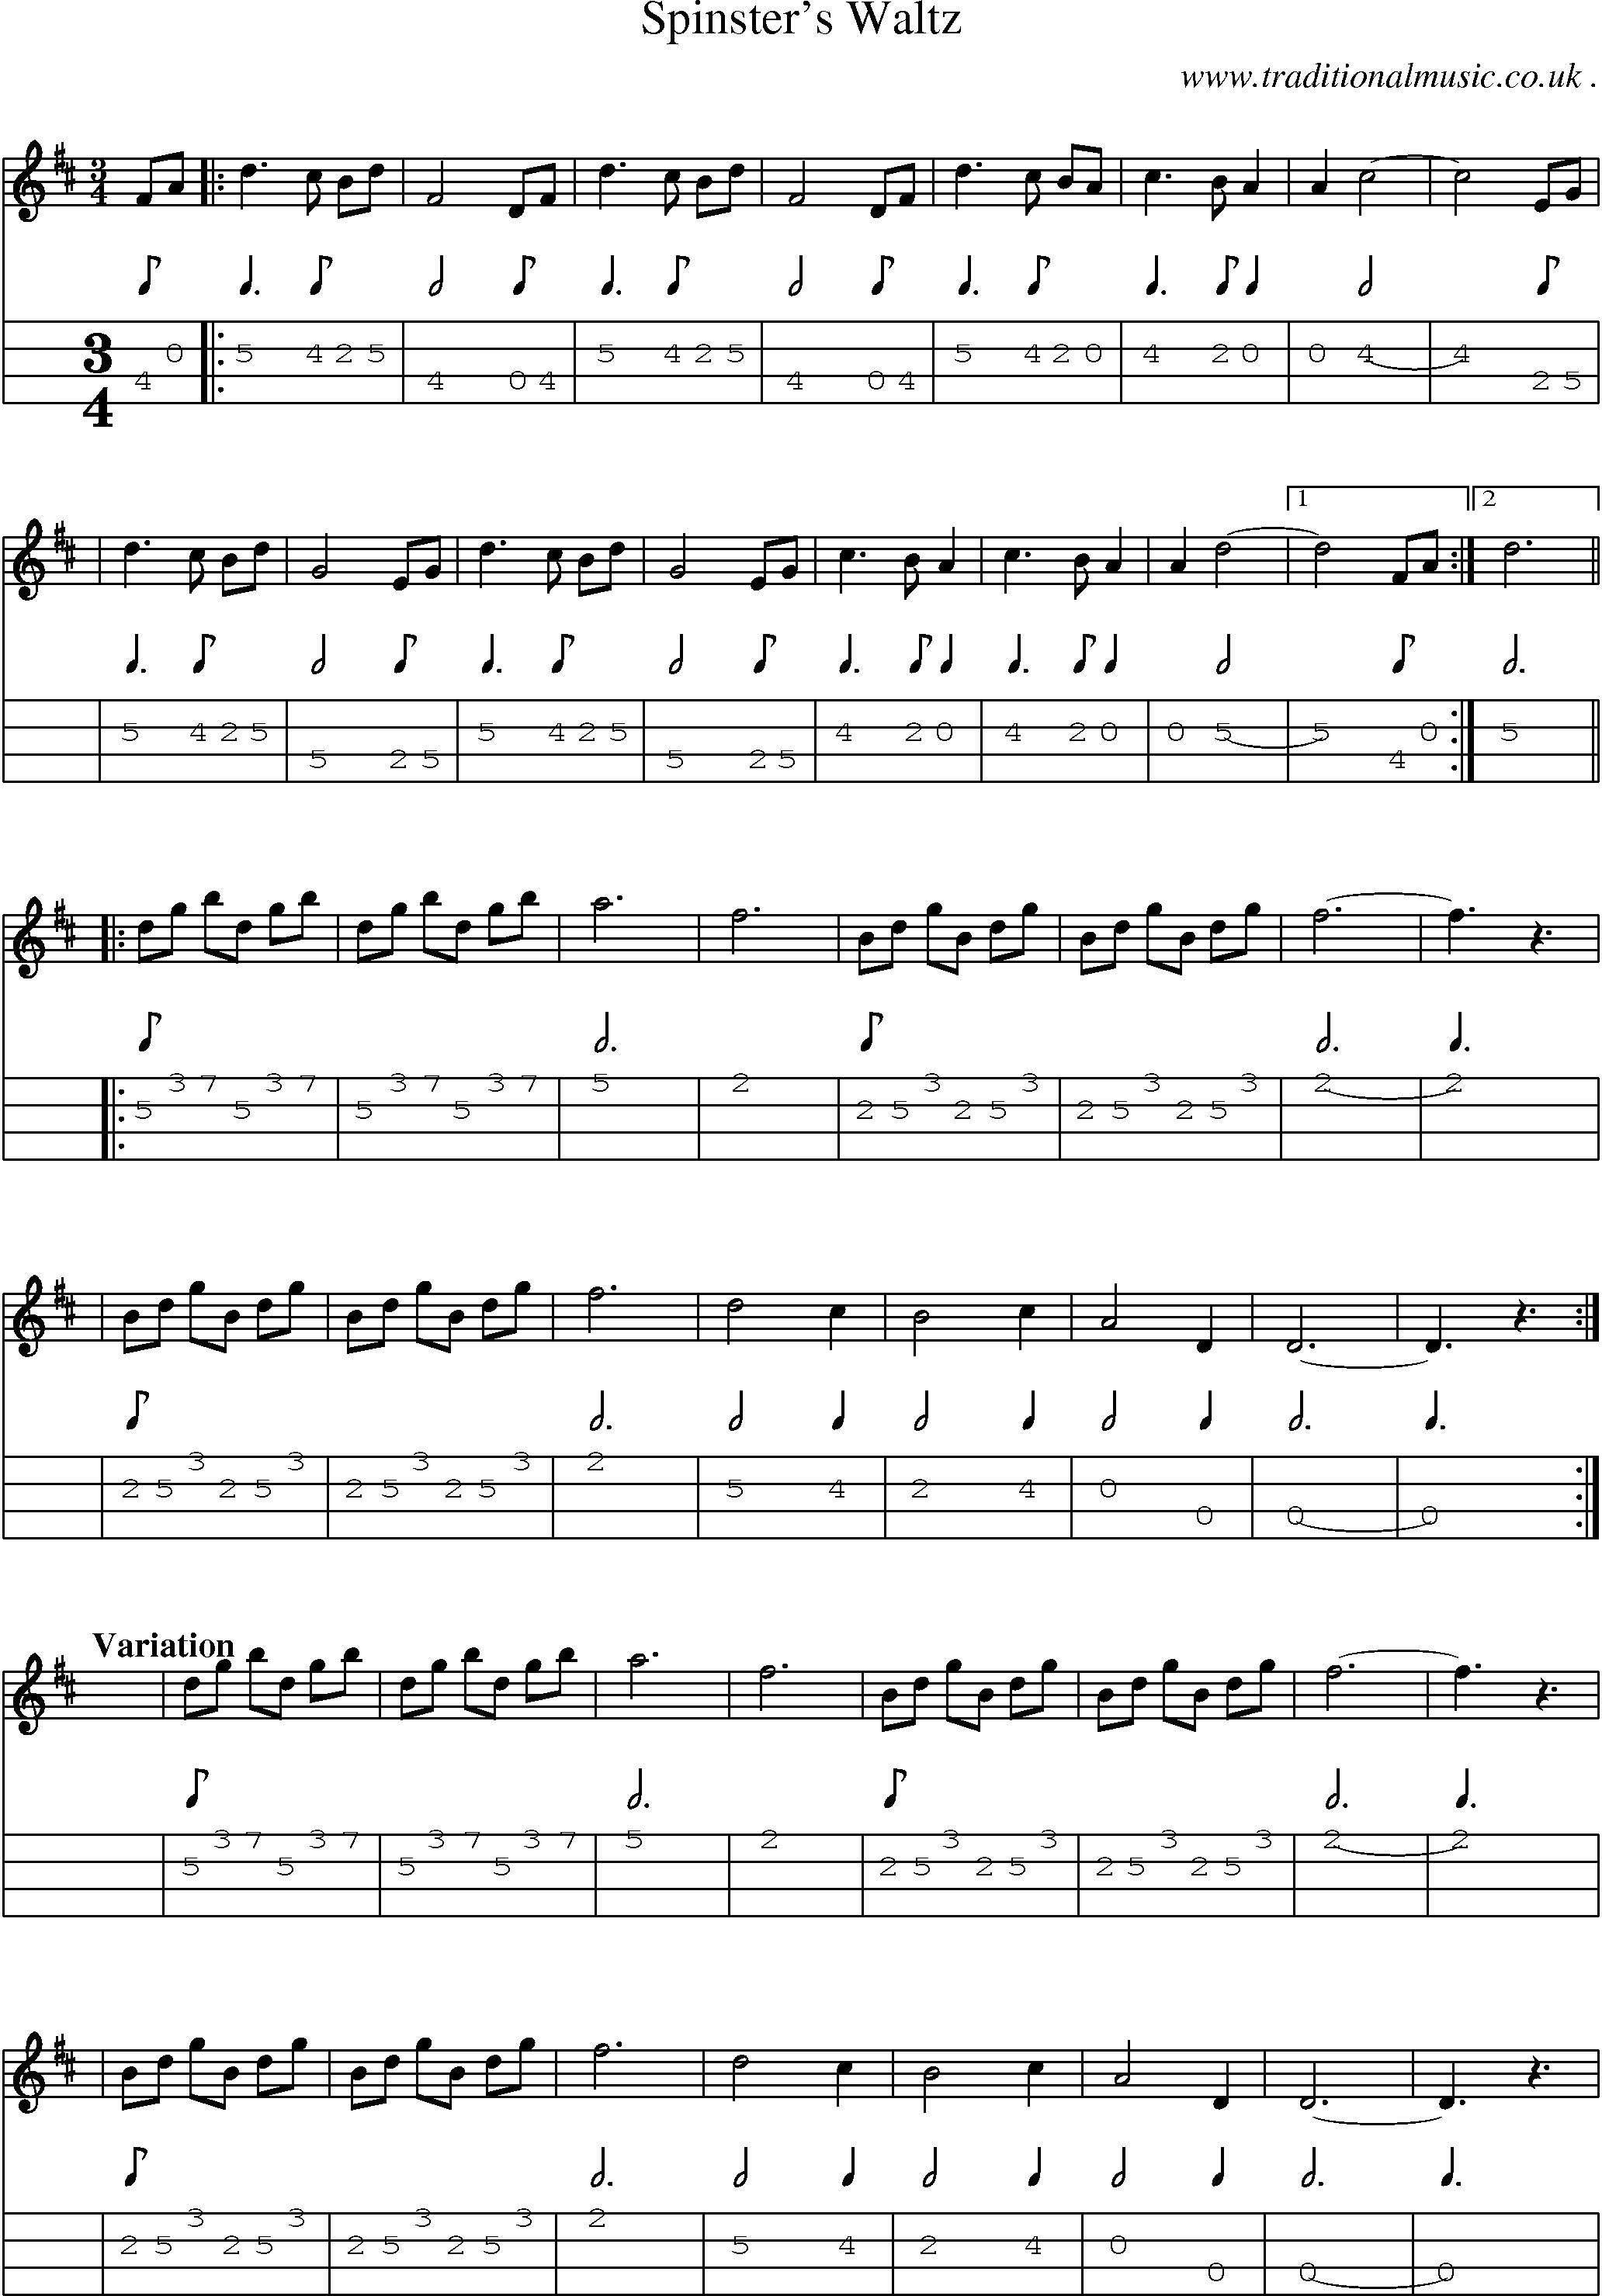 Sheet-music  score, Chords and Mandolin Tabs for Spinsters Waltz